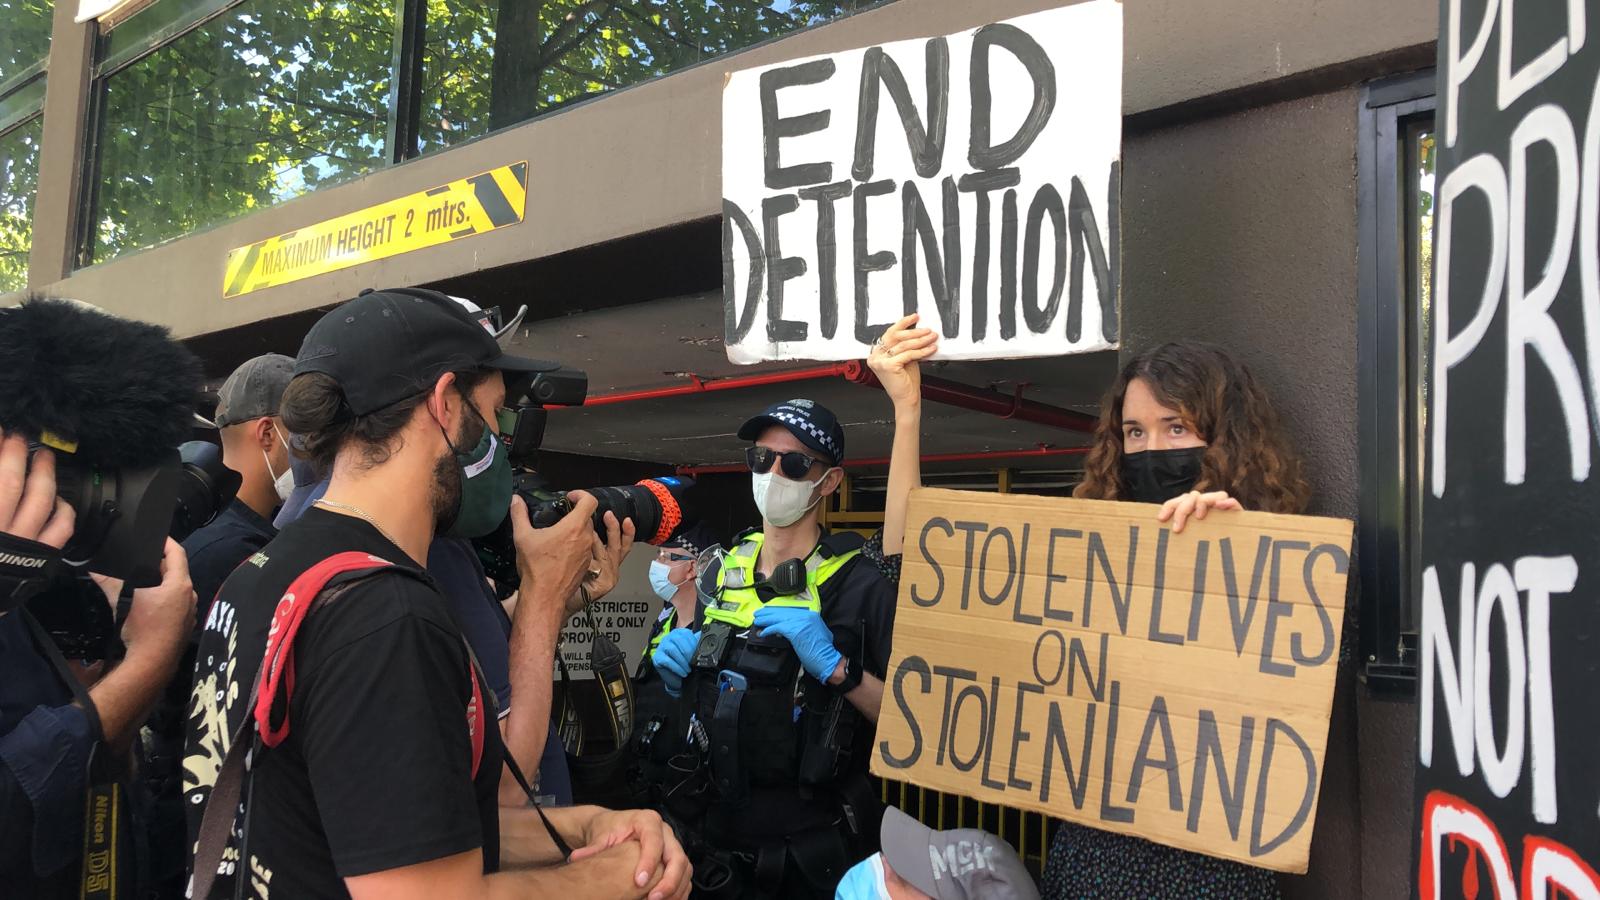 A crowd of media alongside police and protesters at the Park Hotel in Melbourne, Australia on January 10.